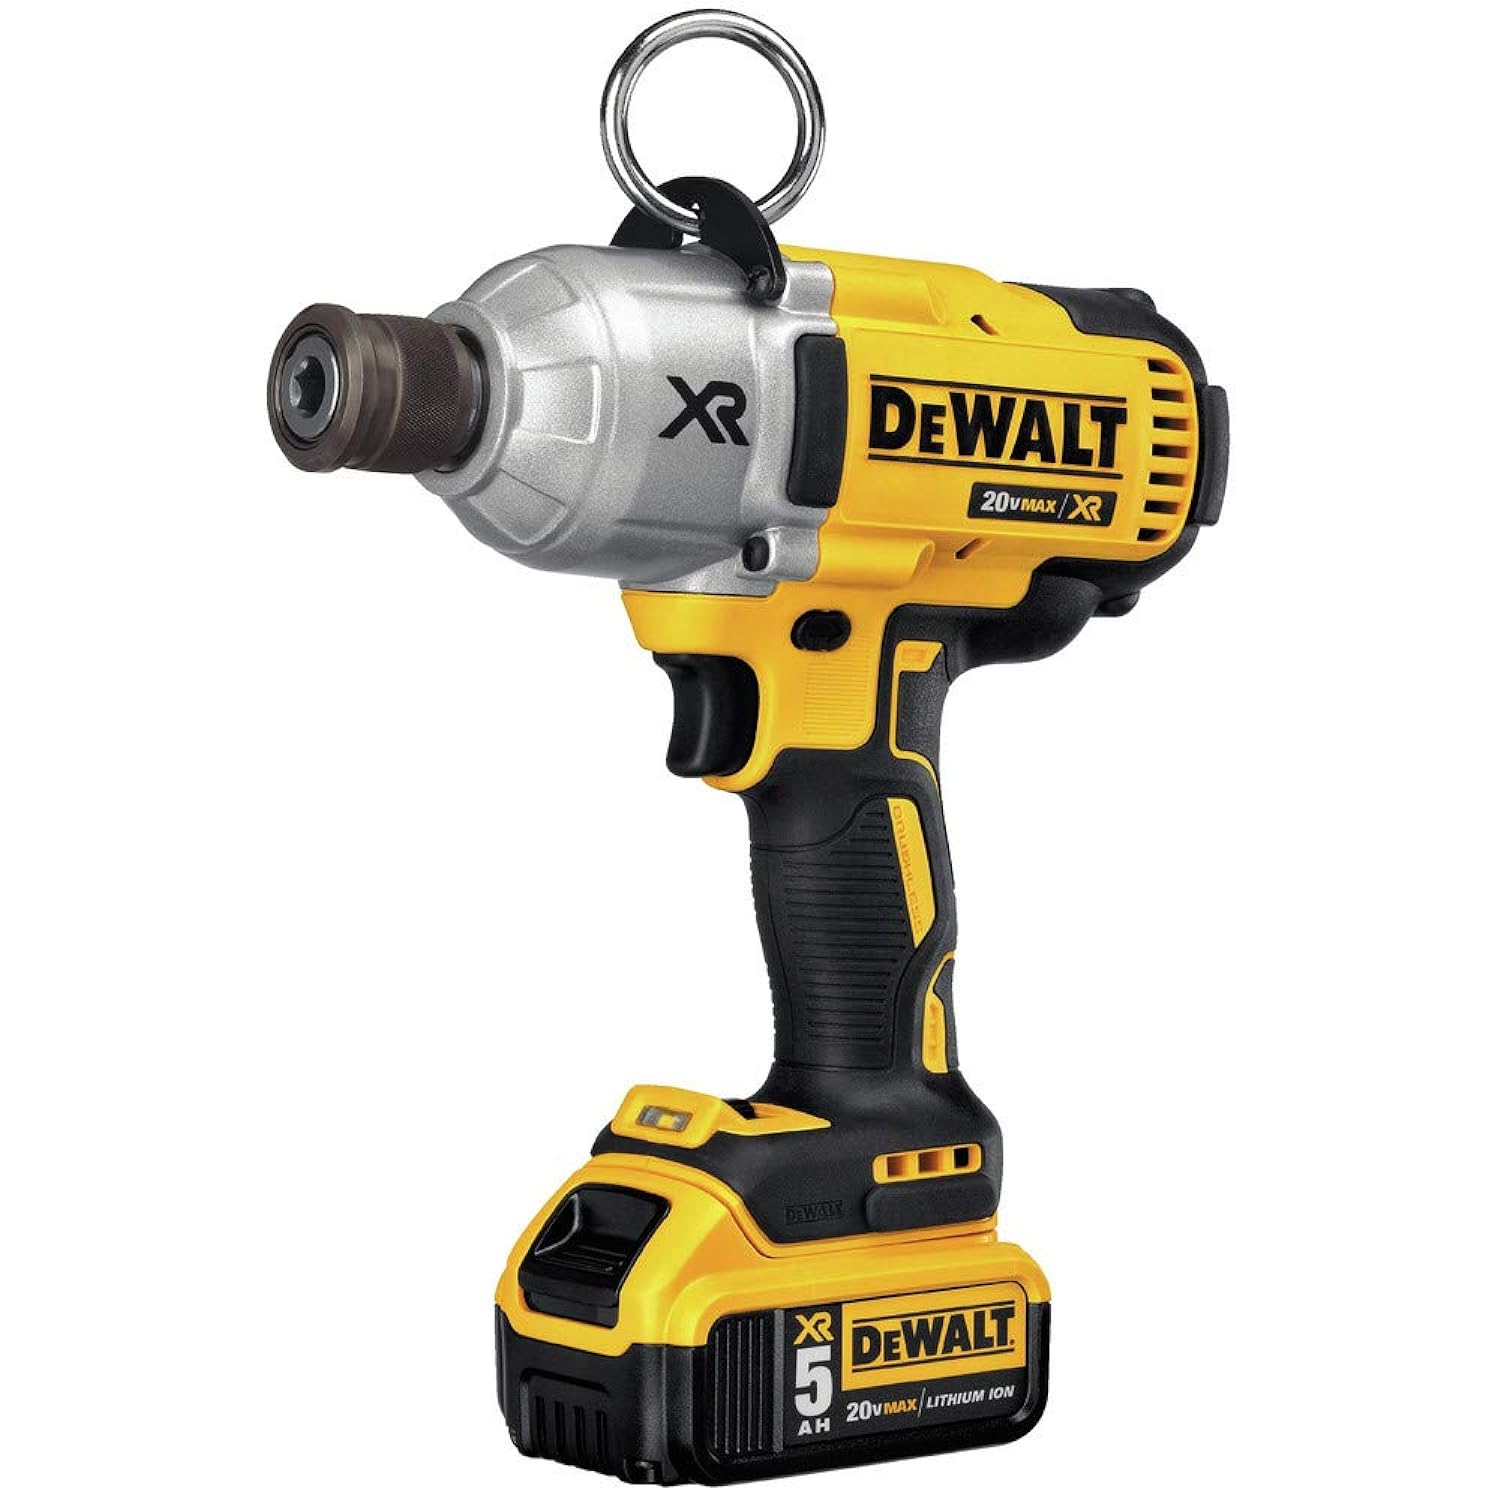 DEWALT 20V MAX XR Cordless Impact Wrench Kit with Quick Release Chuck (DCF898P2)